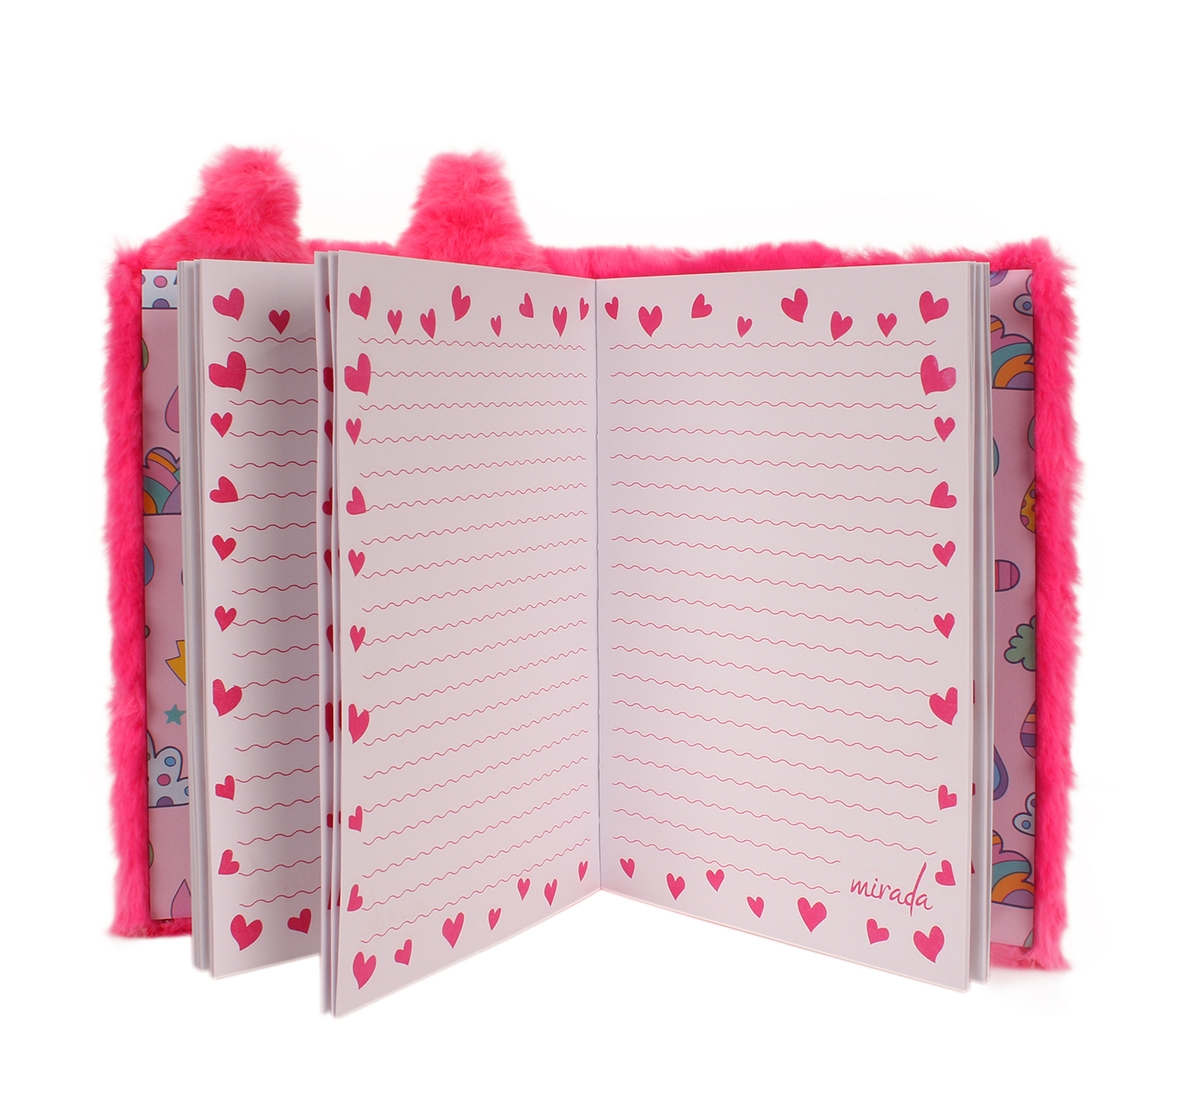 Mirada | Mirada  Whimsical Plush Fox Notebook - Study & Desk Accessories for Kids age 3Y+ (Pink) 1